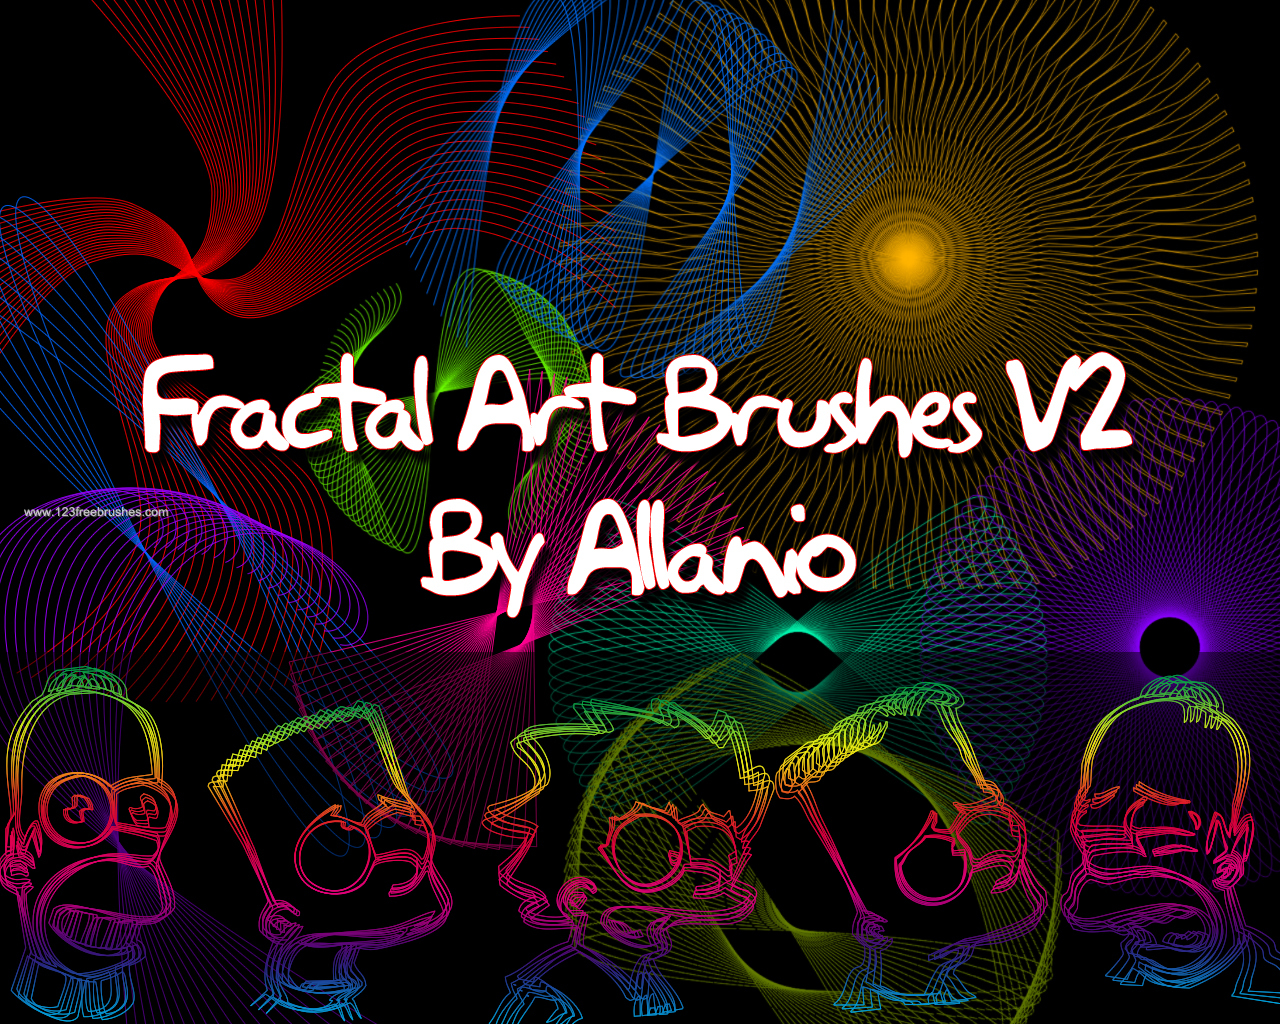 How To Use Abstract Brushes In Photoshop